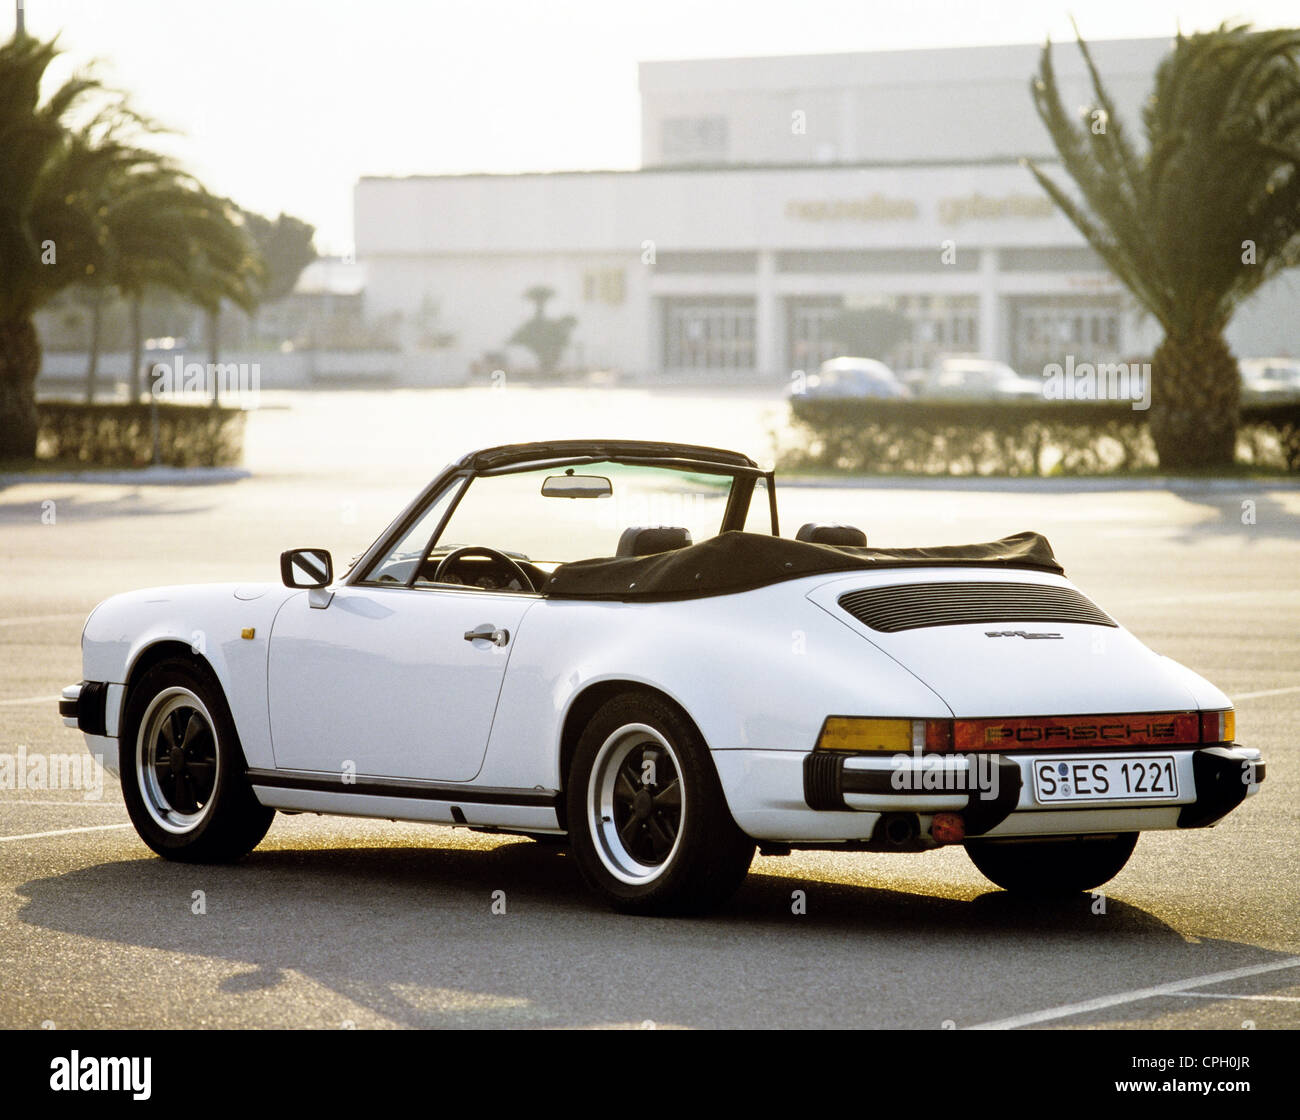 transport / transportation, cars, car type, Porsche 911 SC 3.0 Cabriolet, year of manufacture: 1983, Additional-Rights-Clearences-Not Available Stock Photo